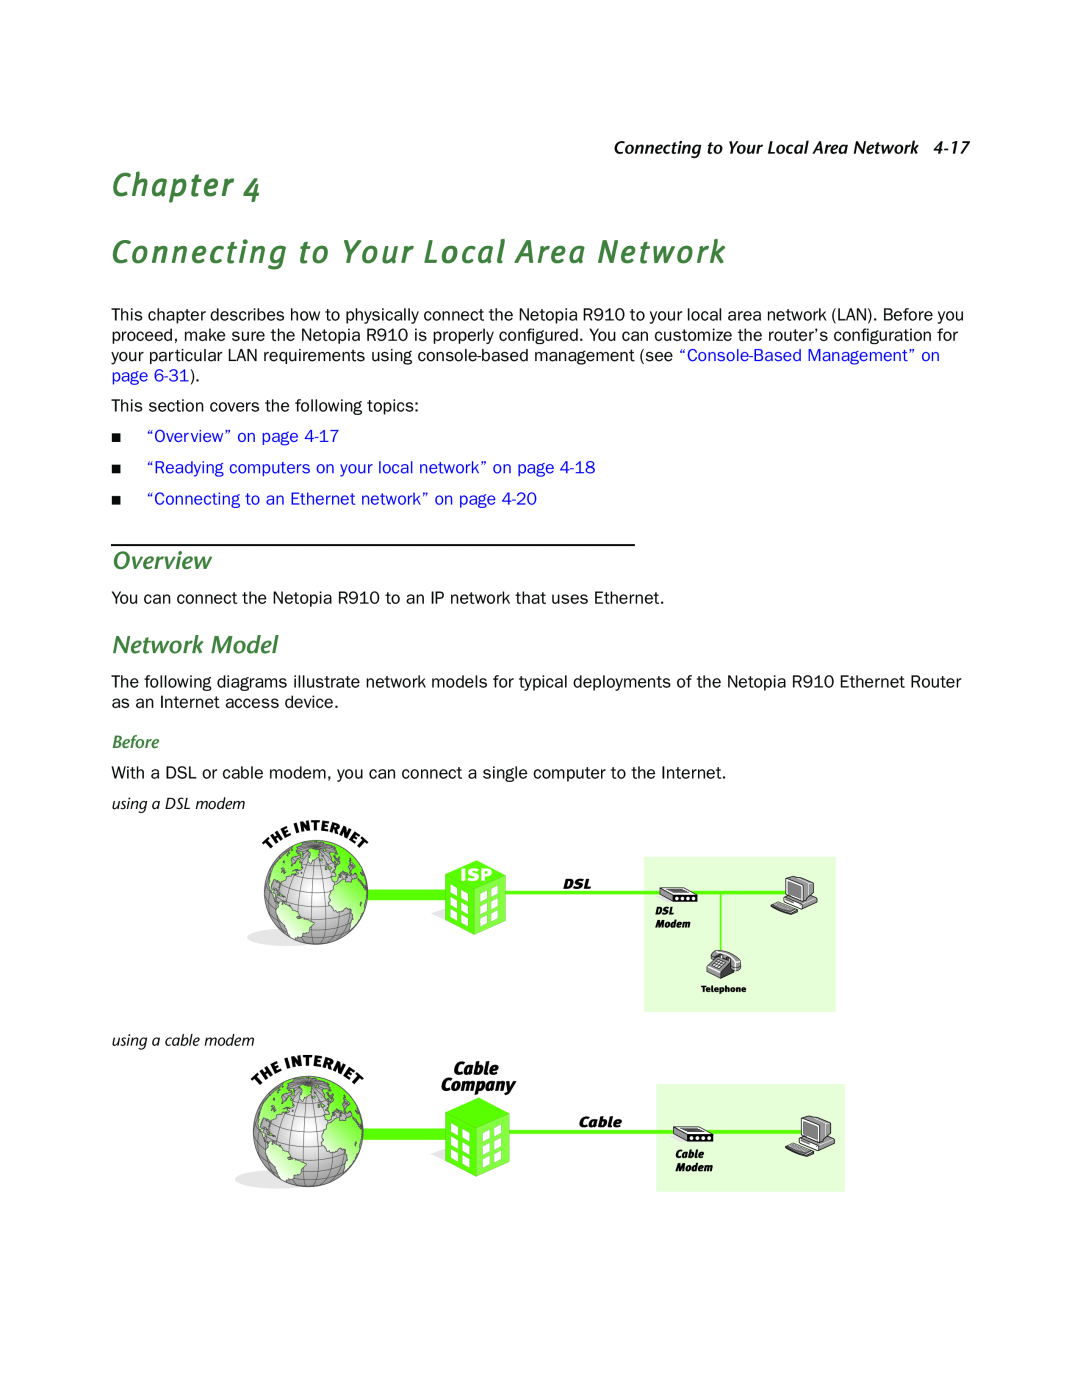 Netopia R910 Chapter Connecting to Your Local Area Network, Network Model, “Connecting to an Ethernet network” on page 